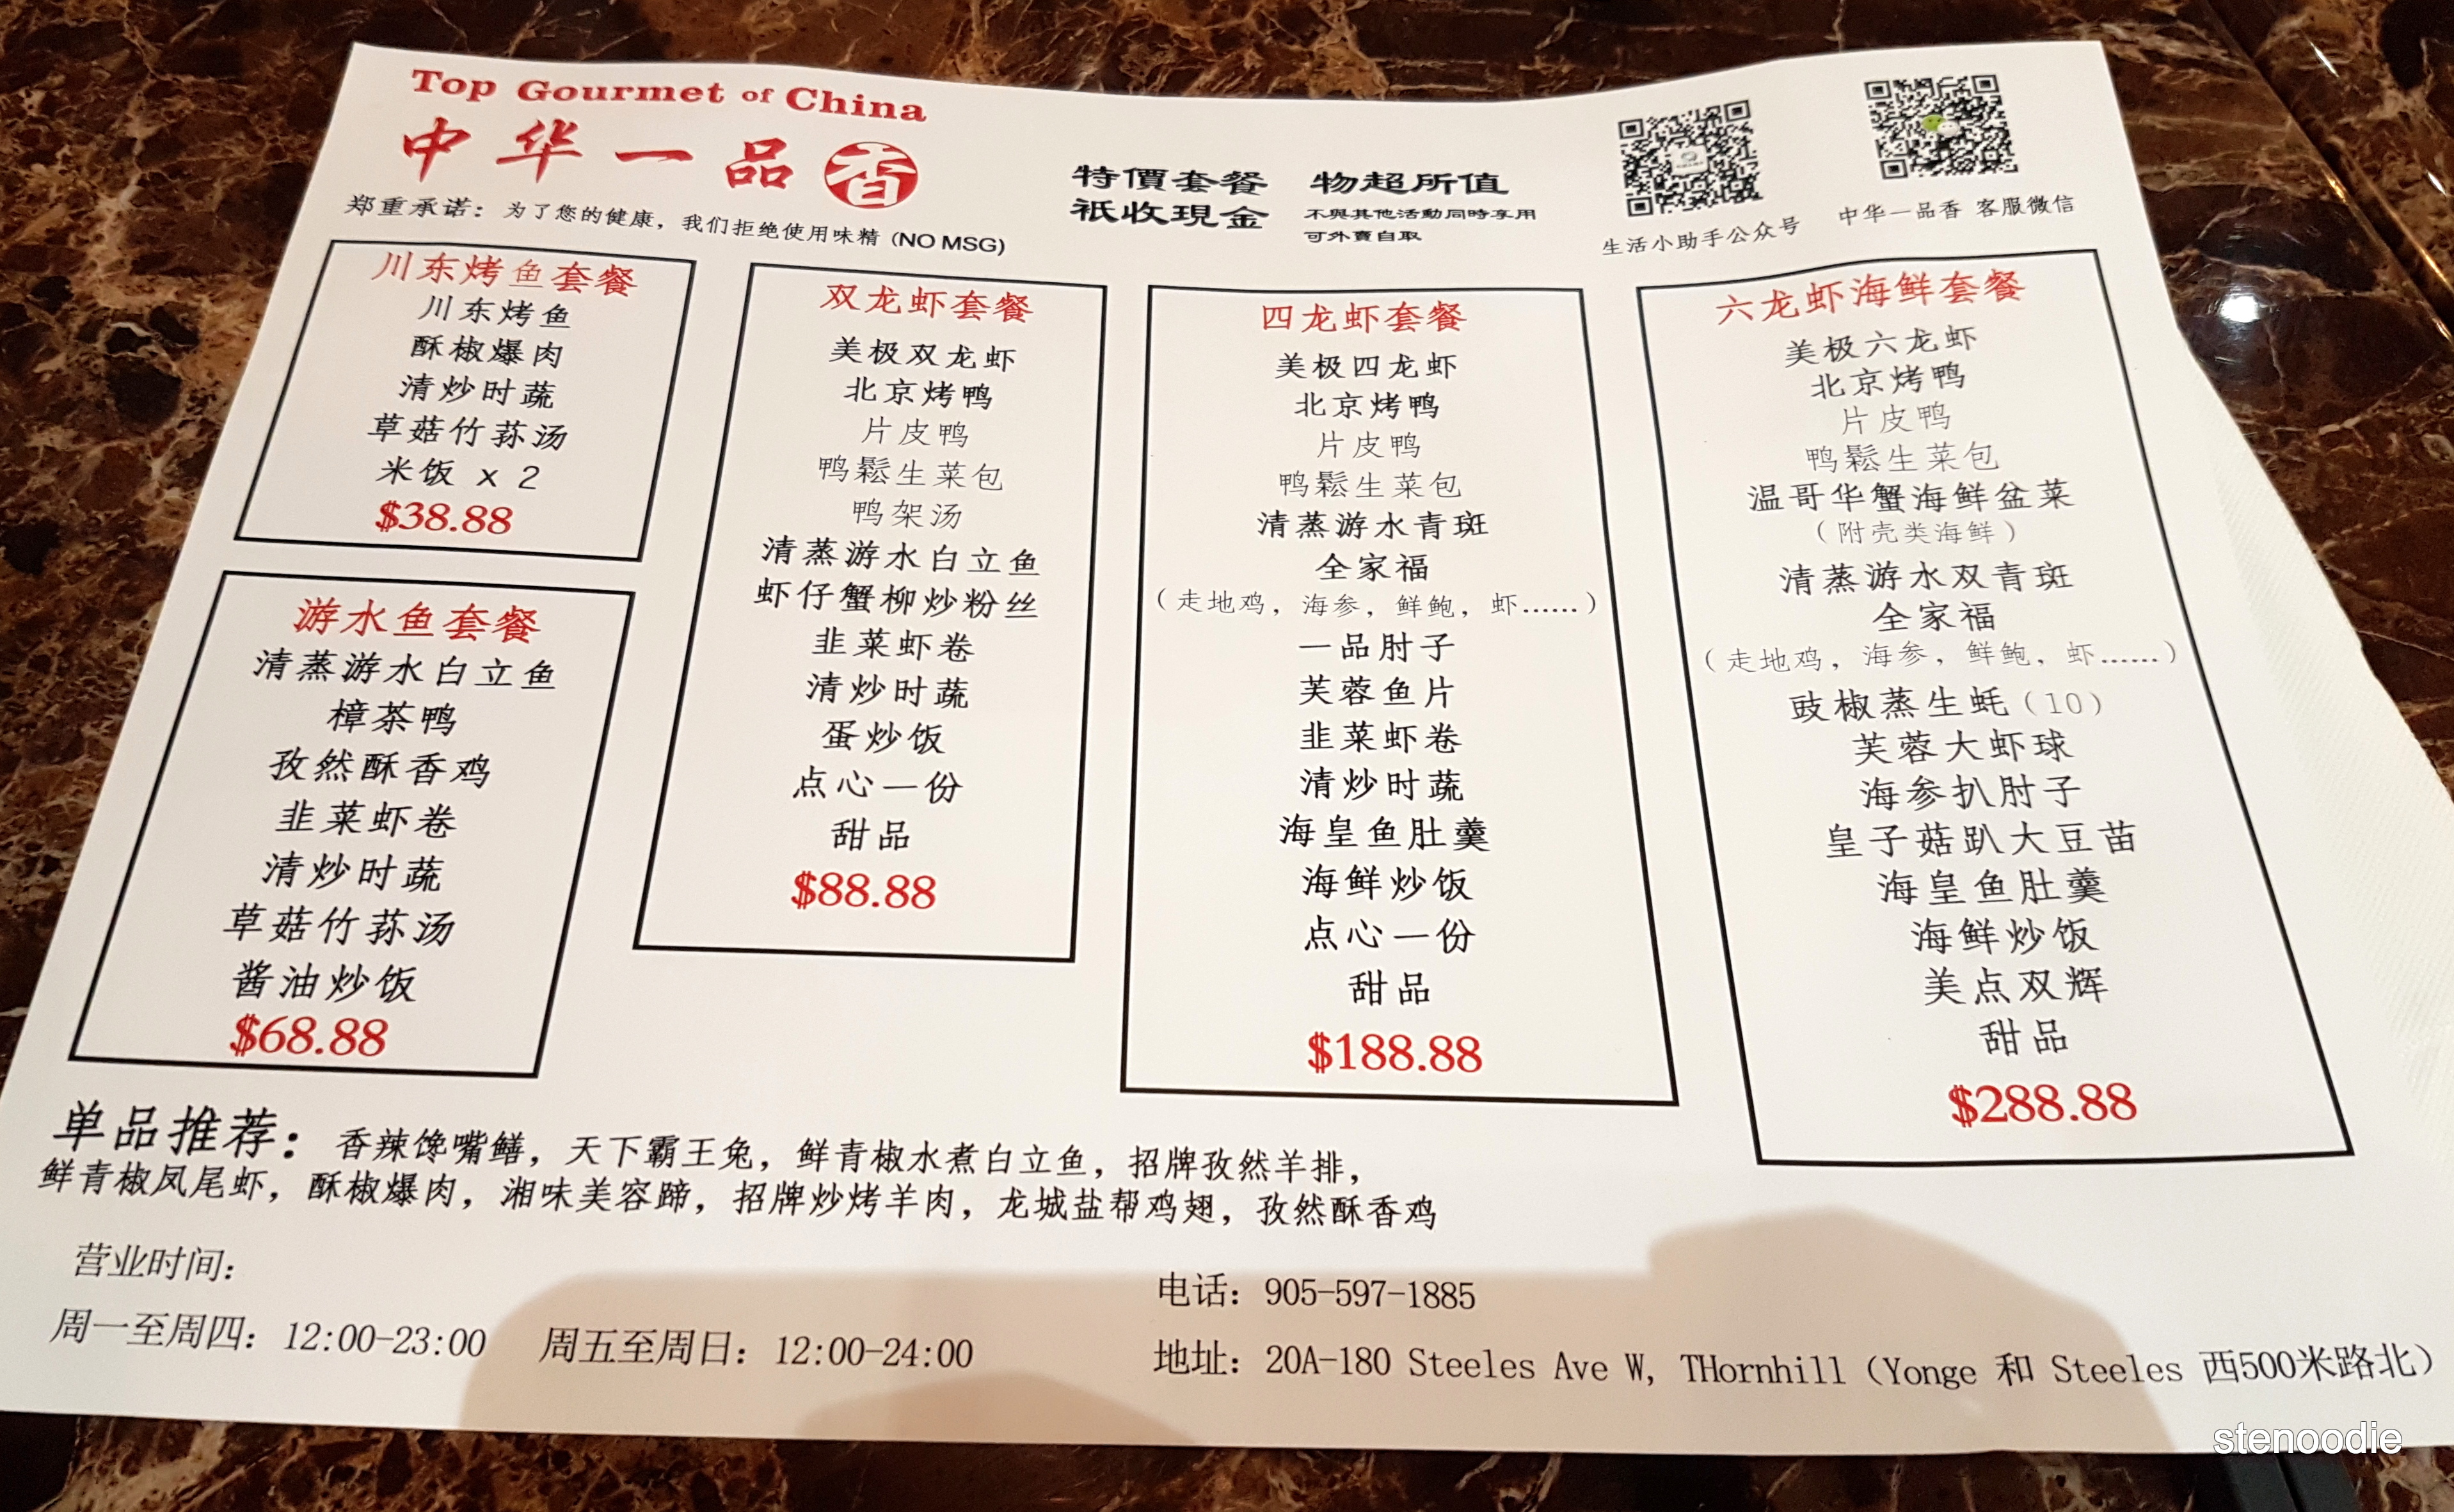 Top Gourmet of China dinner combo menu and prices